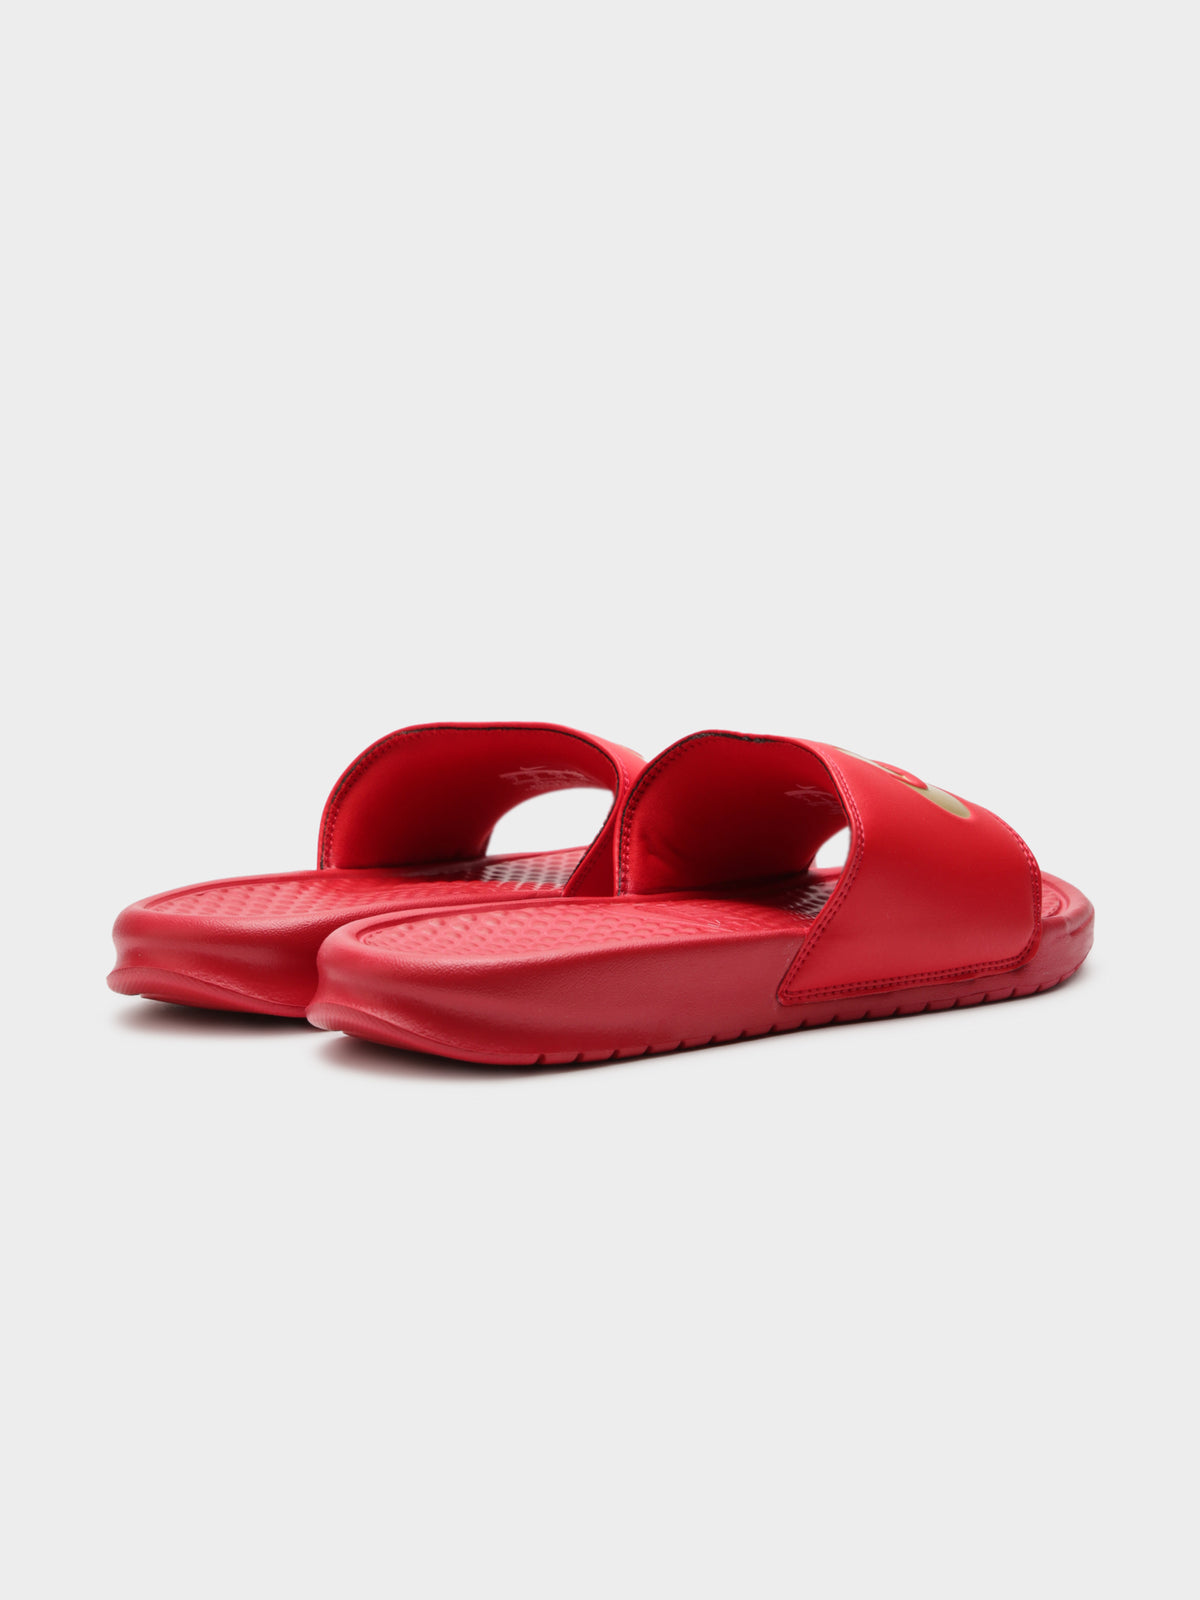 Mens Benassi Just Do It Slides in University Red and Metallic Gold